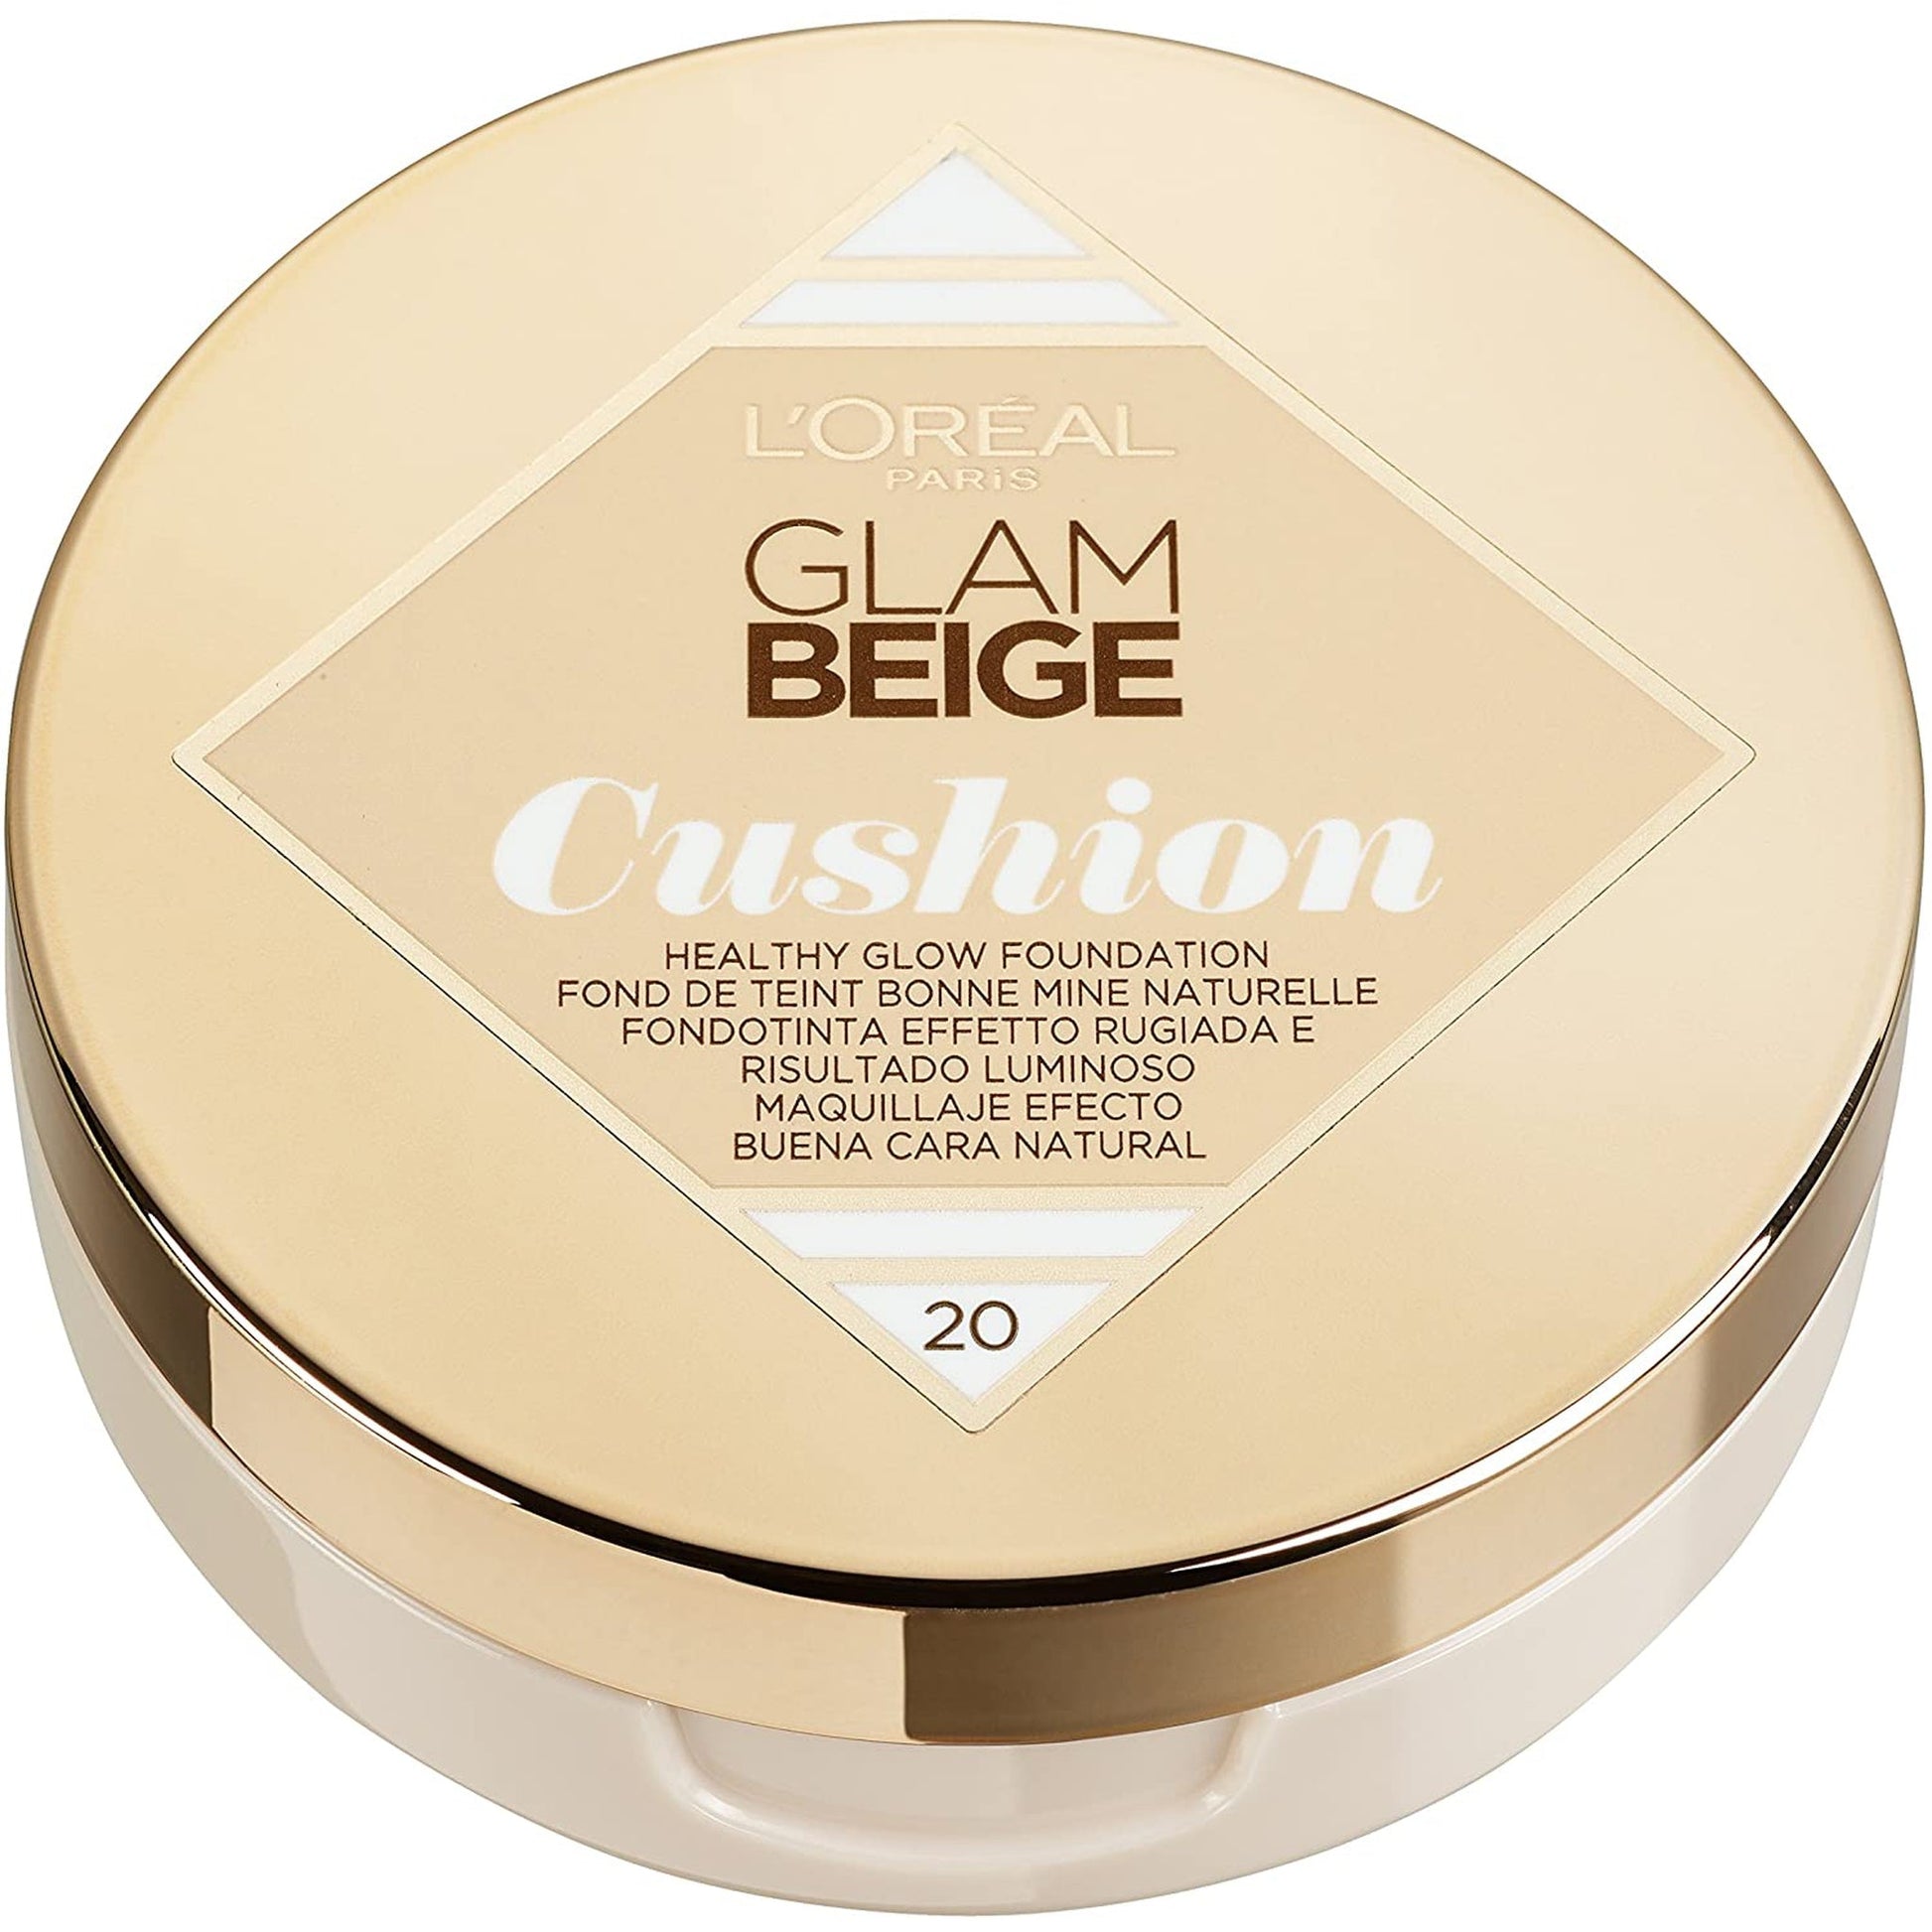 L'Oreal Glam Beige Cushion Foundation 20 Light-L'Oreal-BeautyNmakeup.co.uk